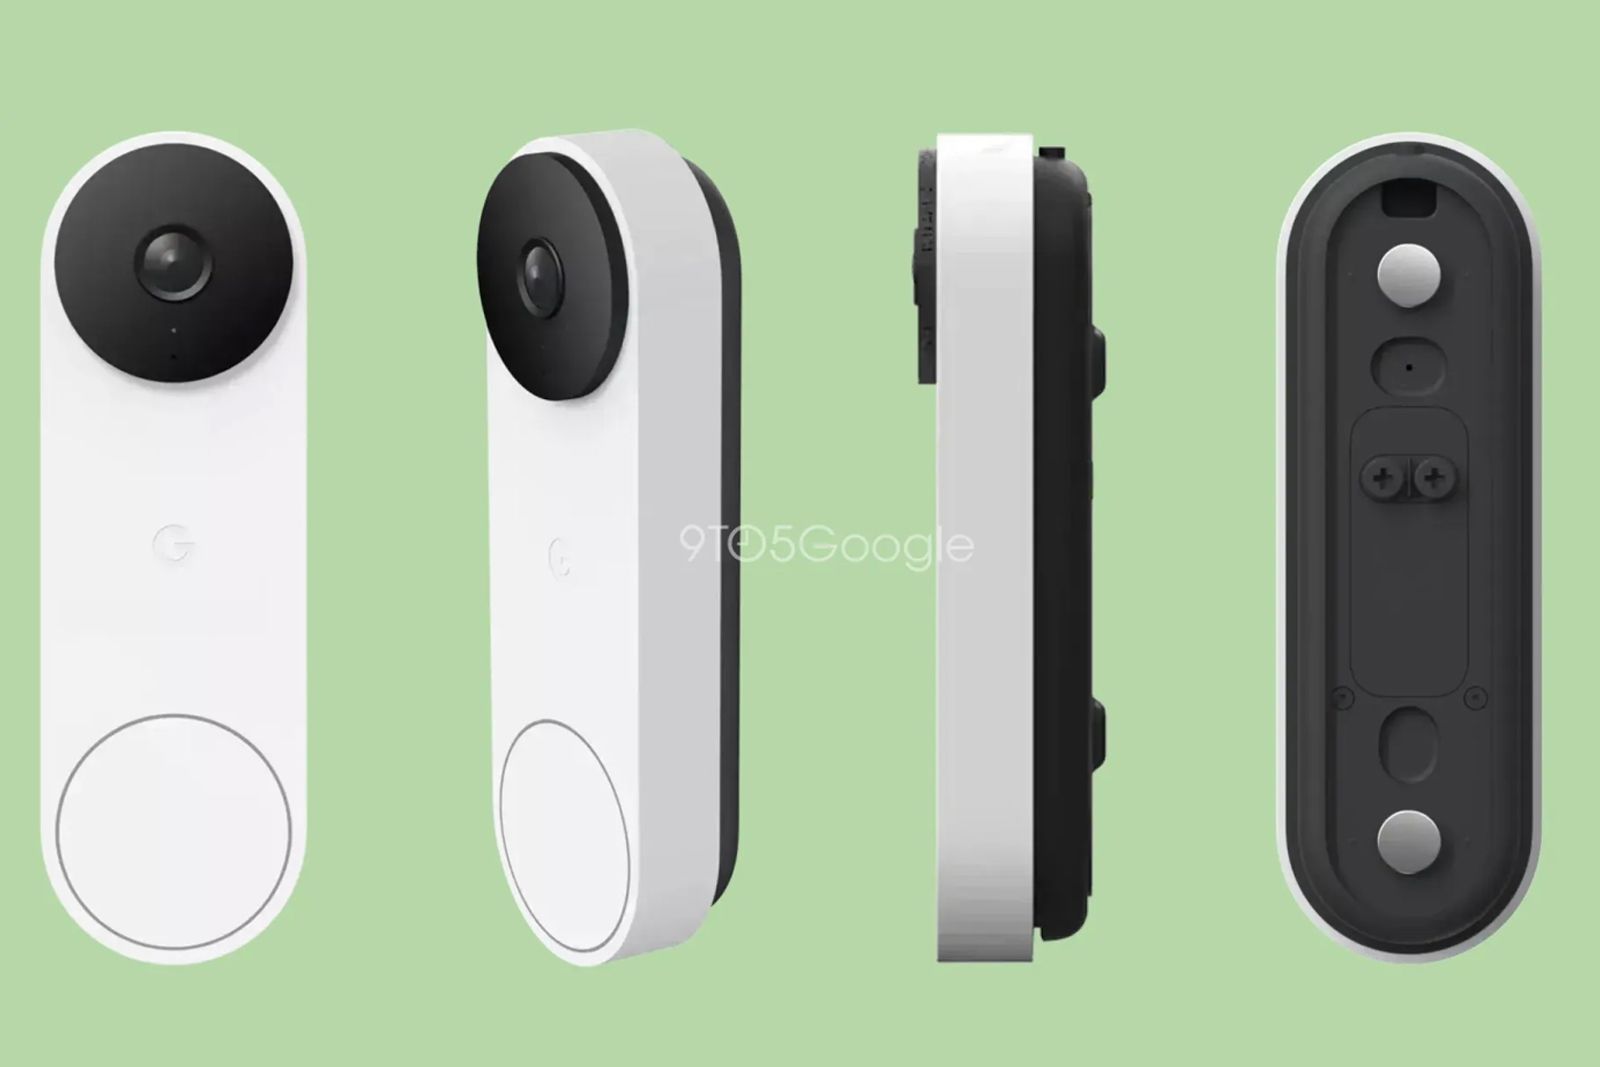 Here's what the Google Nest Doorbell (wired) will look like photo 1